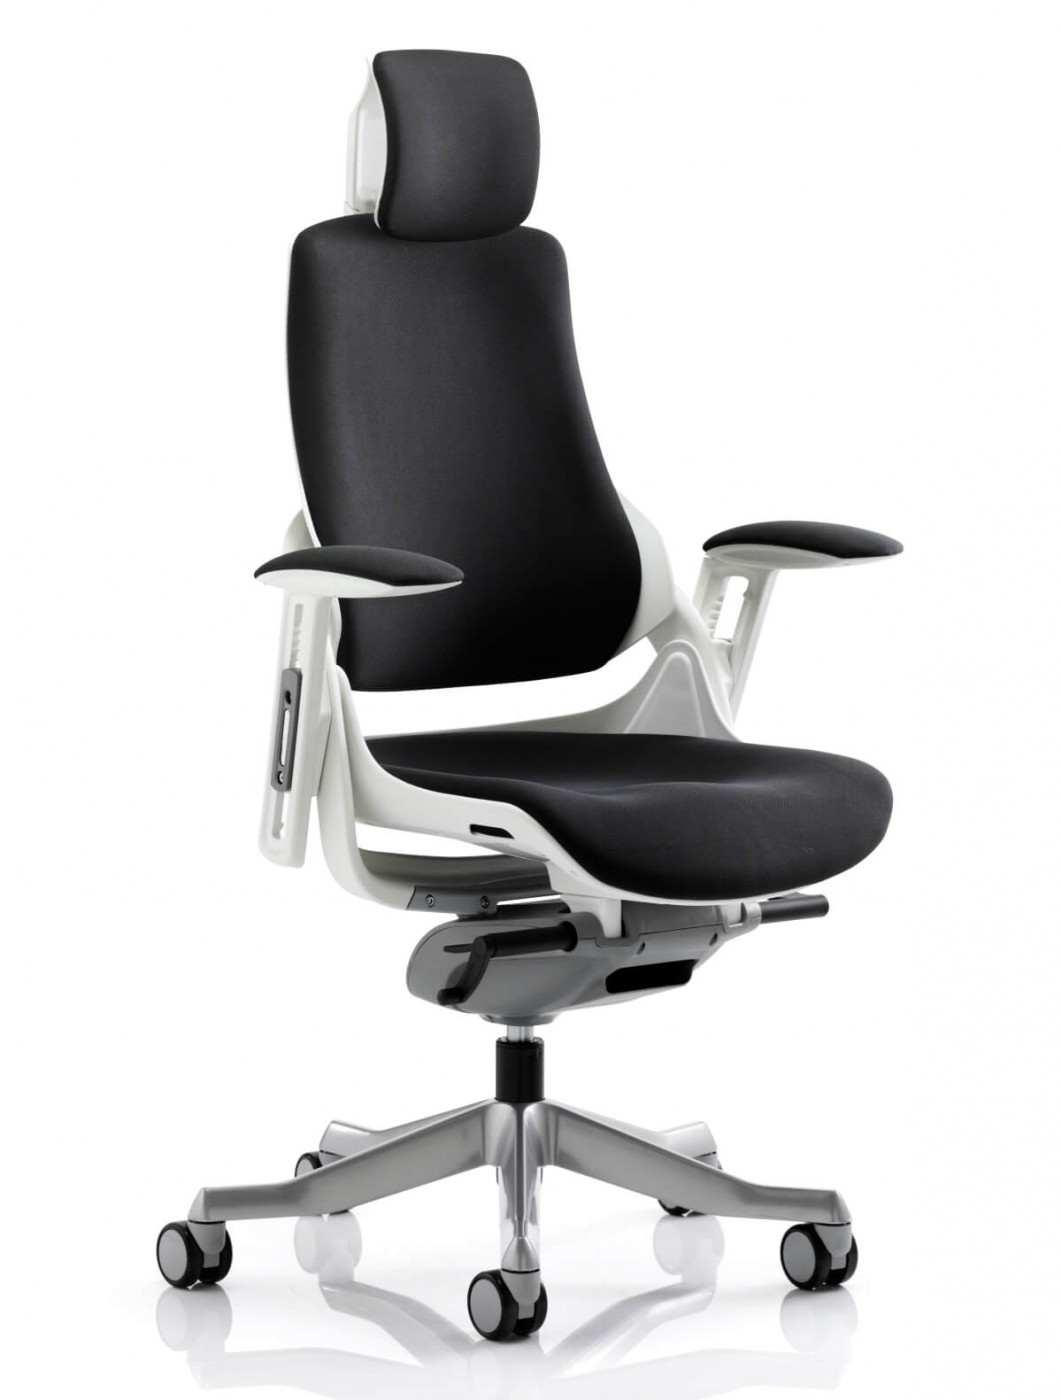 Zure Executive Fabric Office Chair with Headrest KC0161 | 121 Office